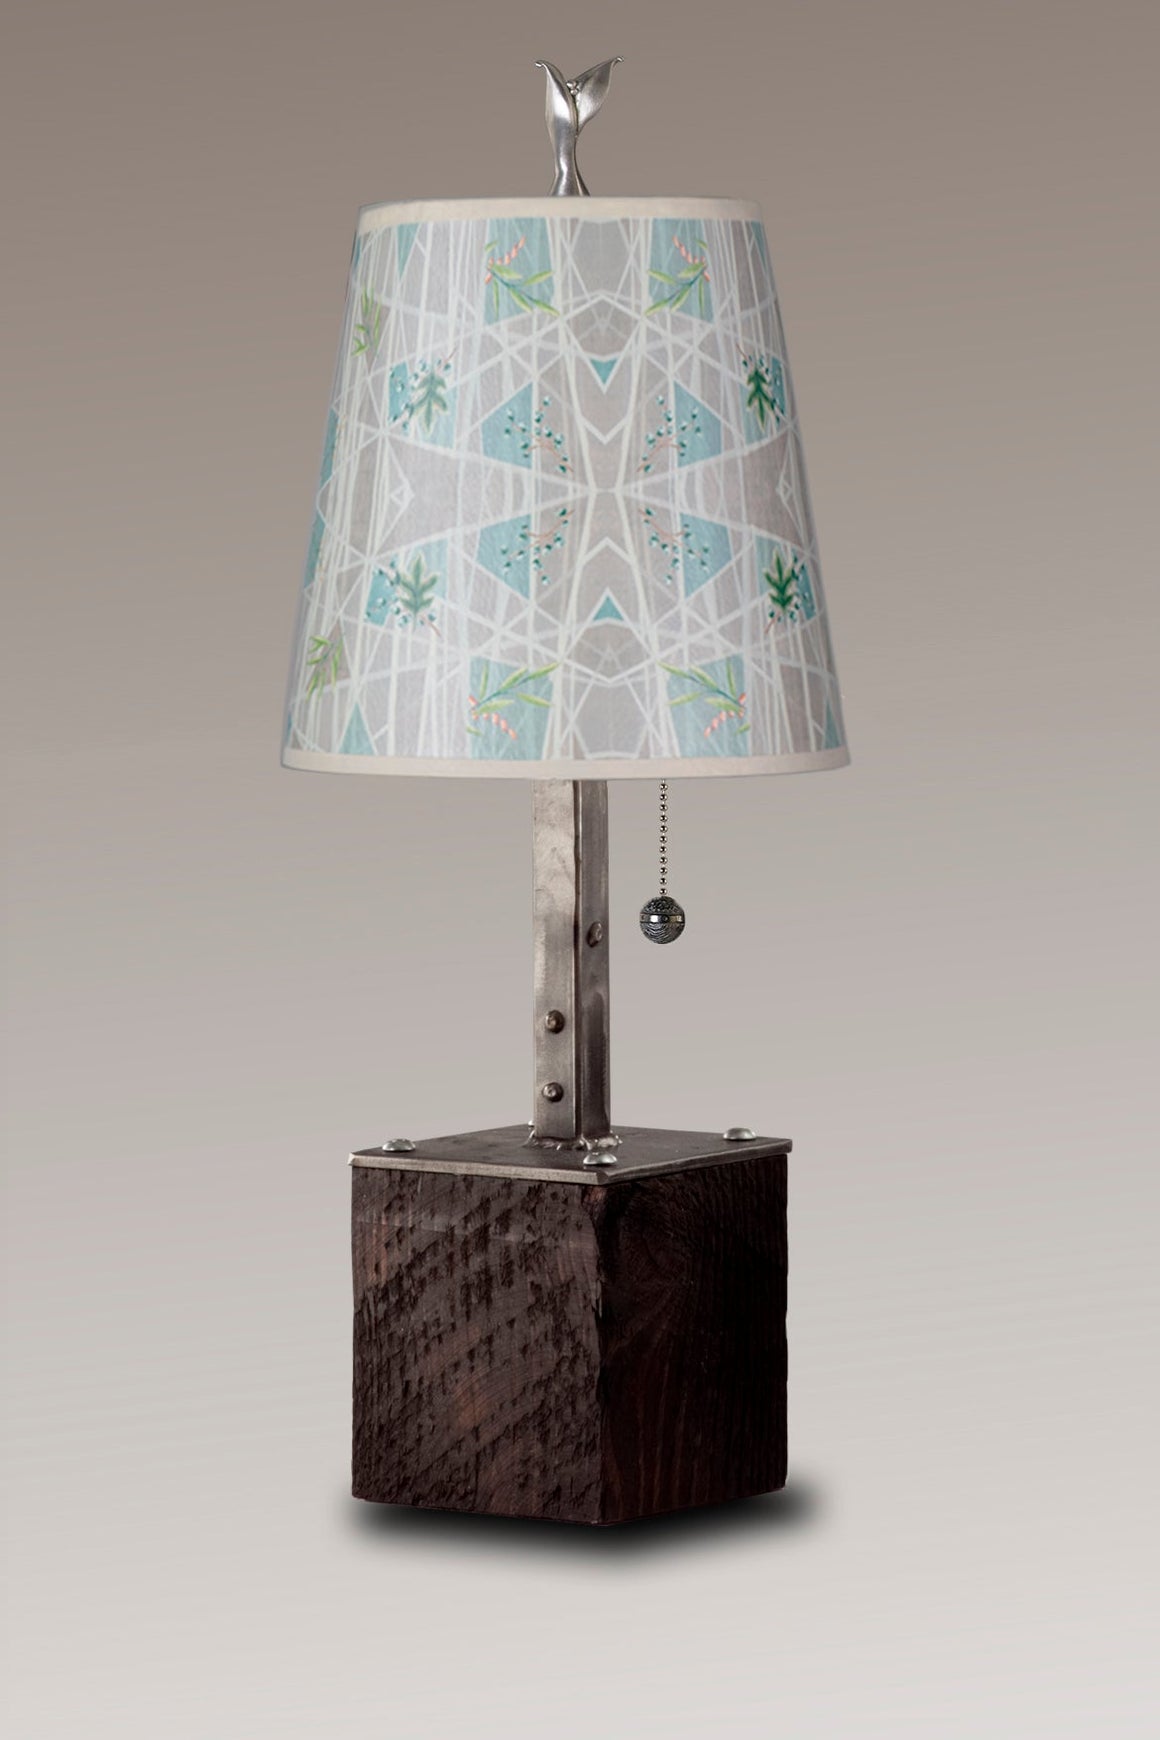 Steel Table Lamp on Reclaimed Wood with Small Drum Shade in Prism